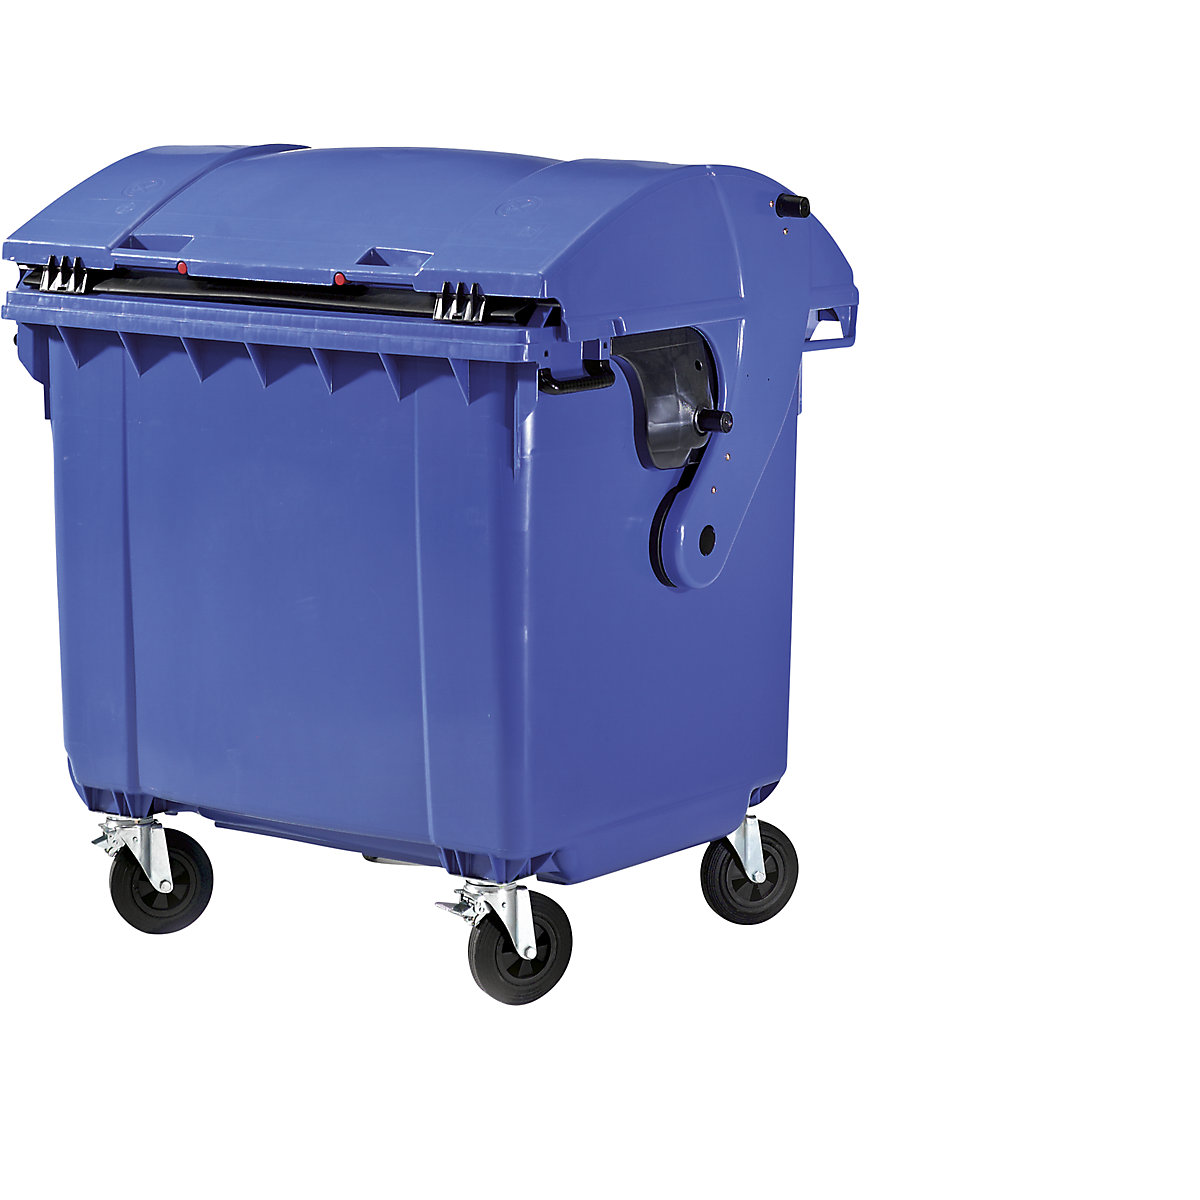 Plastic waste container, DIN EN 840, capacity 1100 l, WxHxD 1360 x 1465 x 1100 mm, sliding lid, child lock, blue, from 5+ items-6